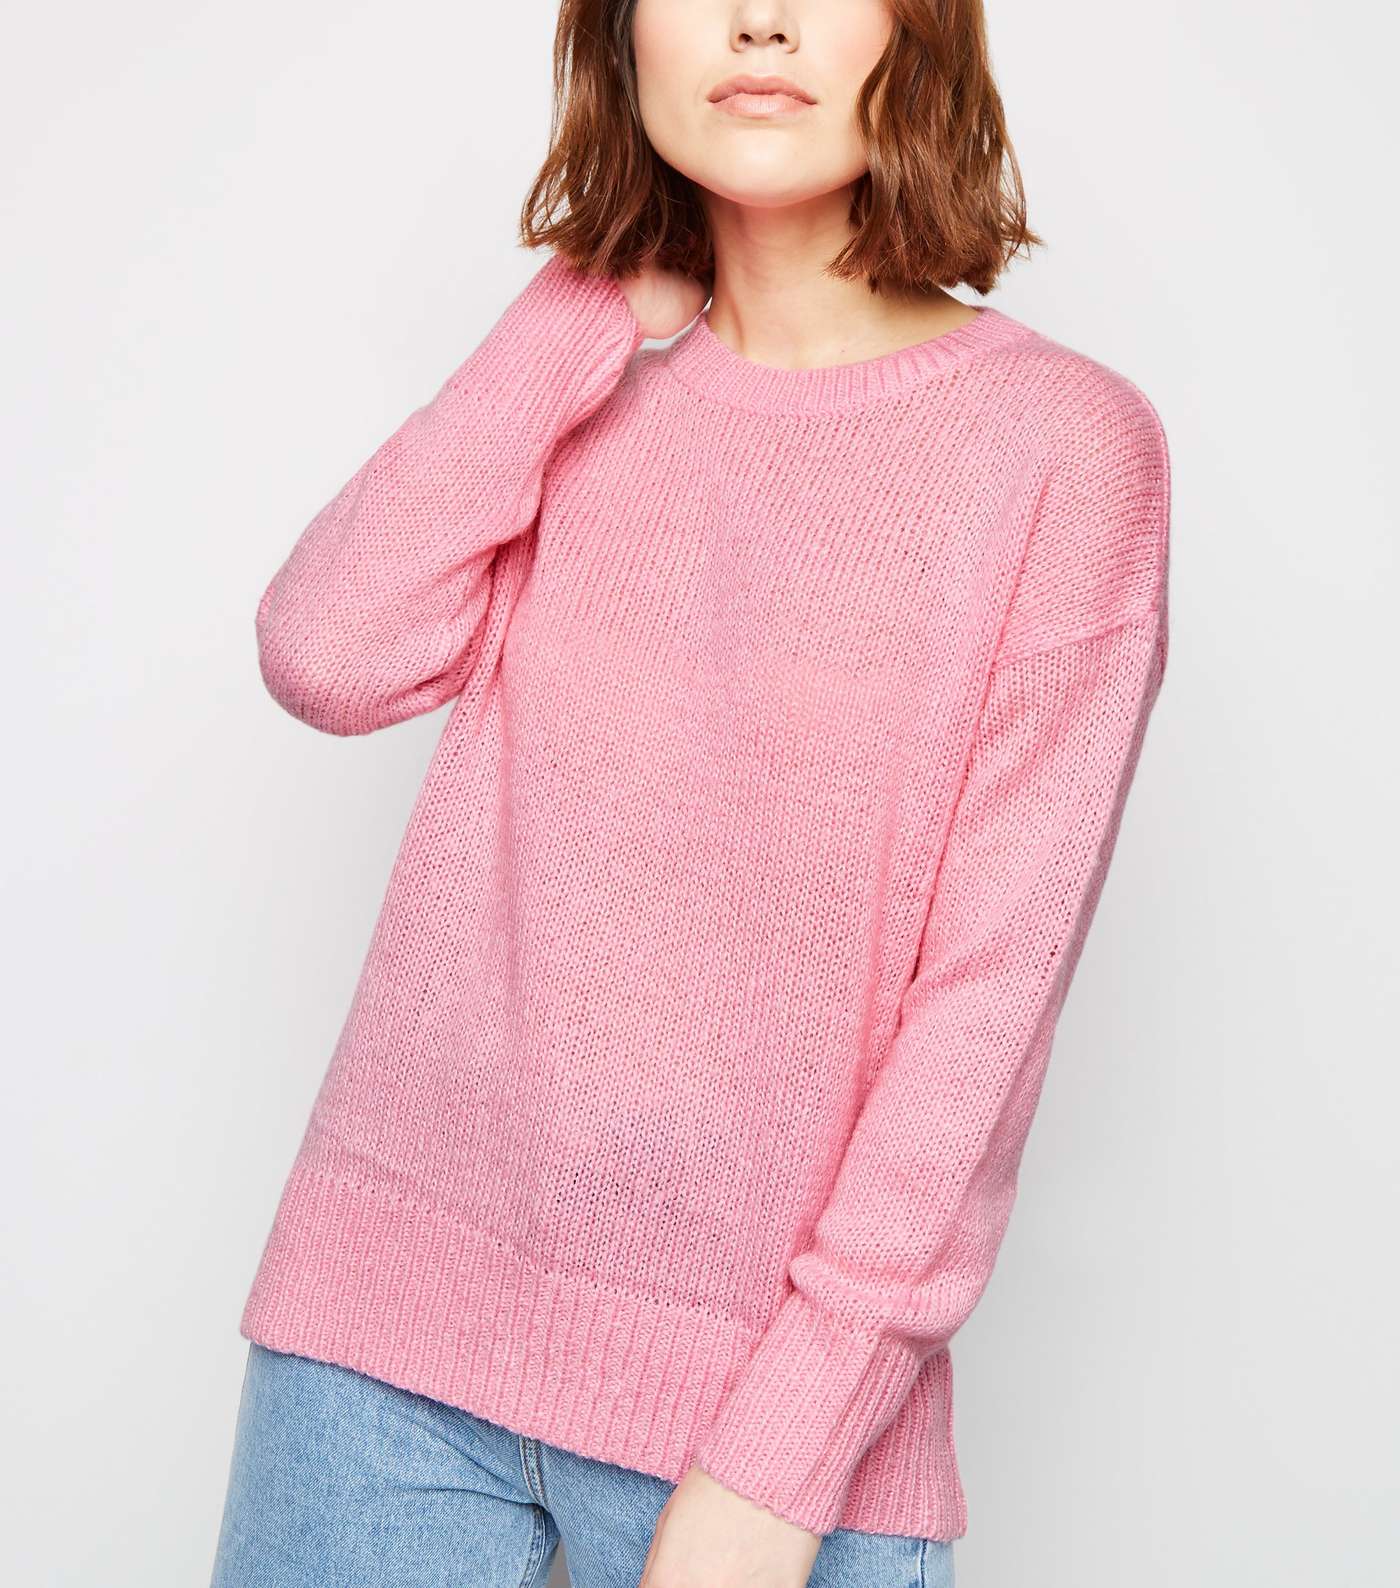 Bright Pink Knitted Jumper 